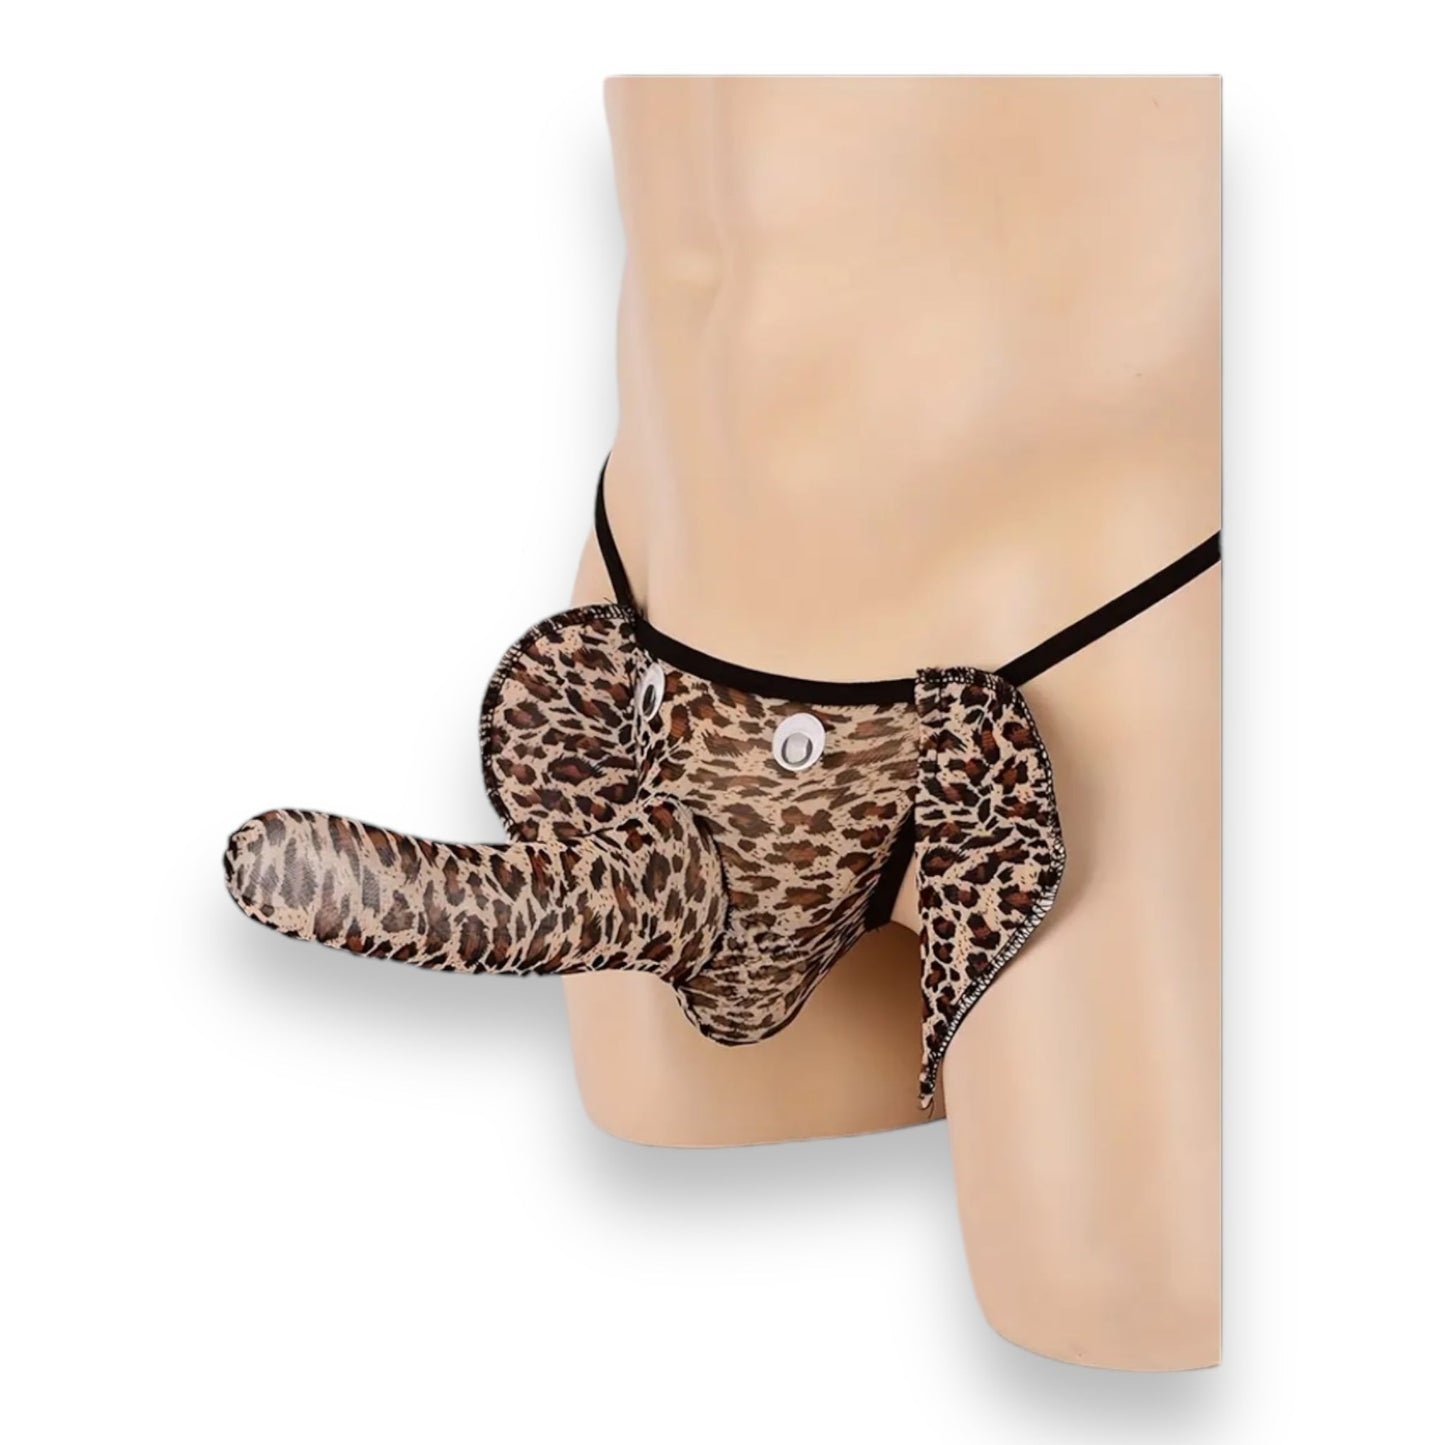 Elephant Men's Briefs in Panther Print - One Size